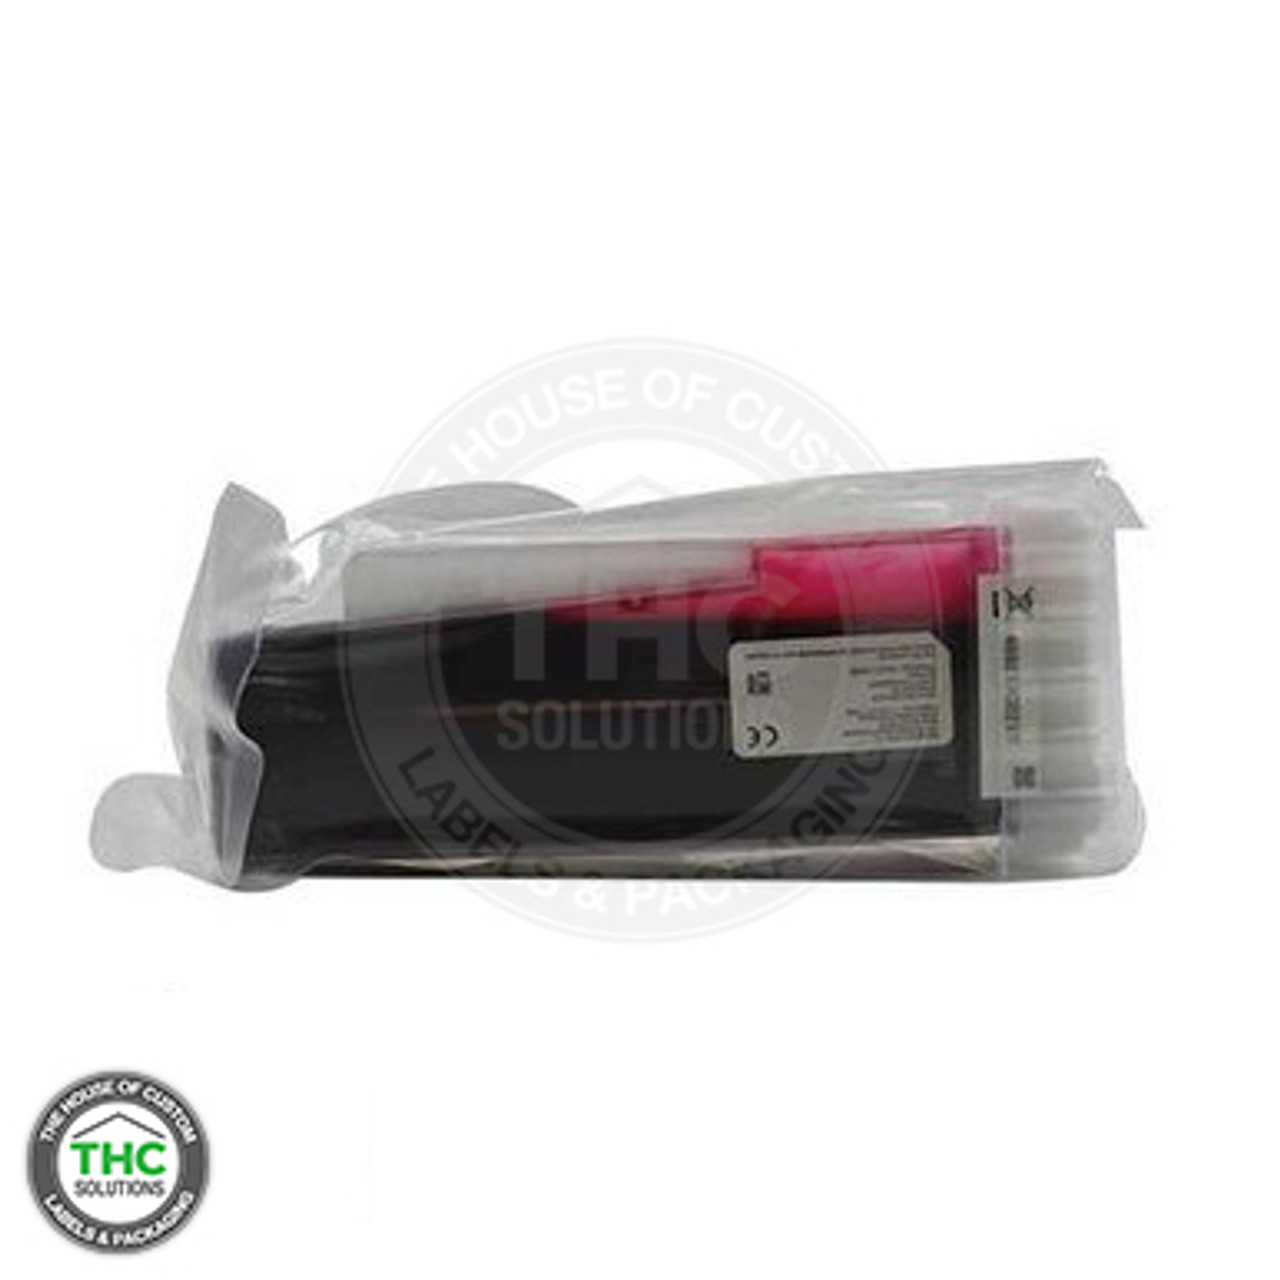 THC Roll-On Pro Round Product Label Applicator (Air Compressor Required)